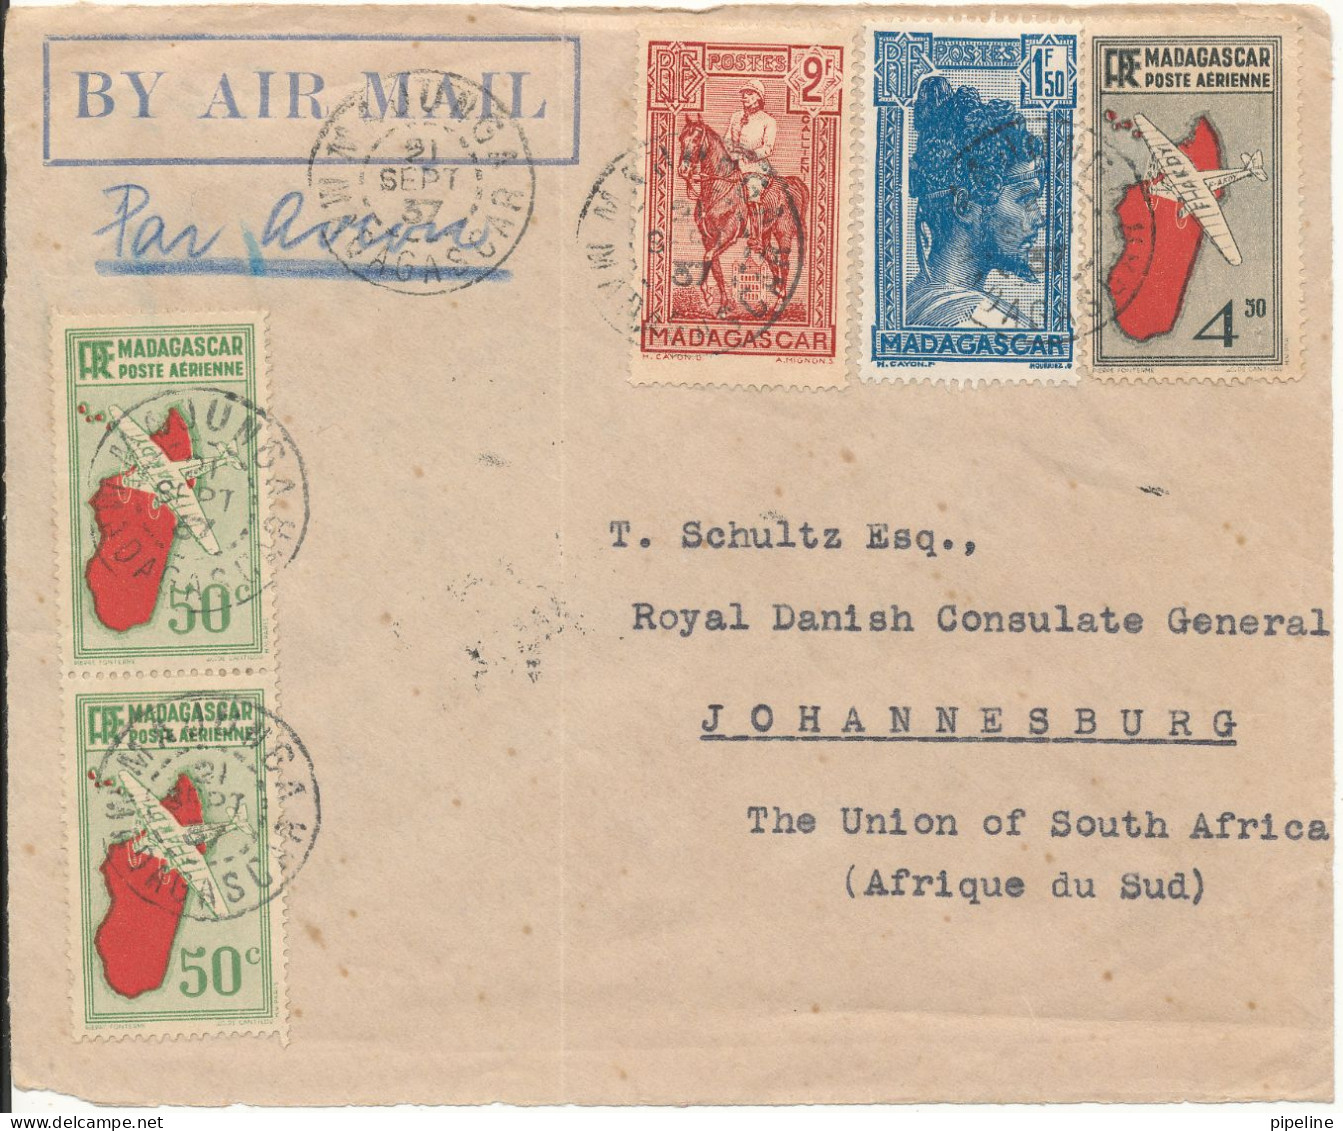 Madagascar FRONTPAGE Of A Cover Sent To The Royal Danish Consulate Johannesburg South Africa 21-9-1937 NB: NB : - Airmail